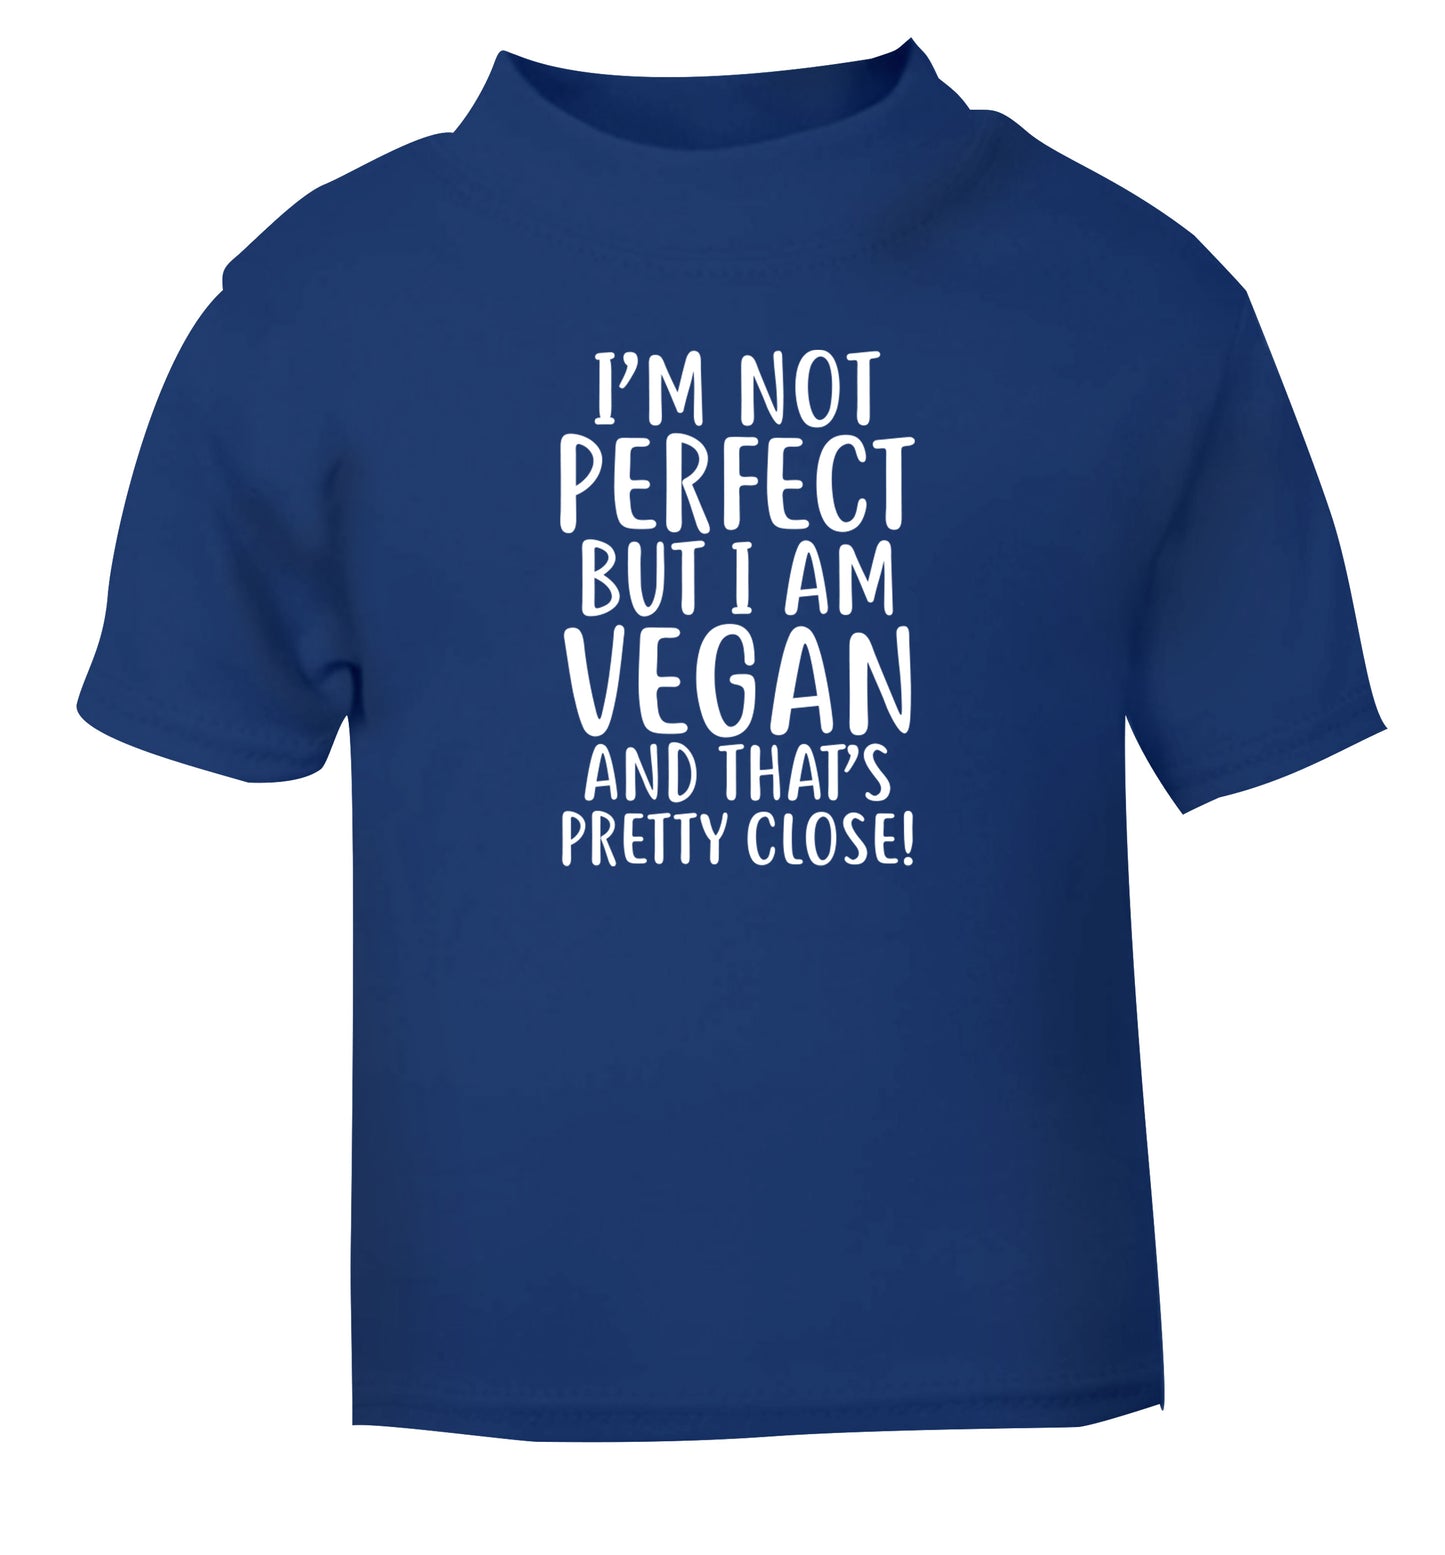 Might not be perfect but I am vegan blue Baby Toddler Tshirt 2 Years